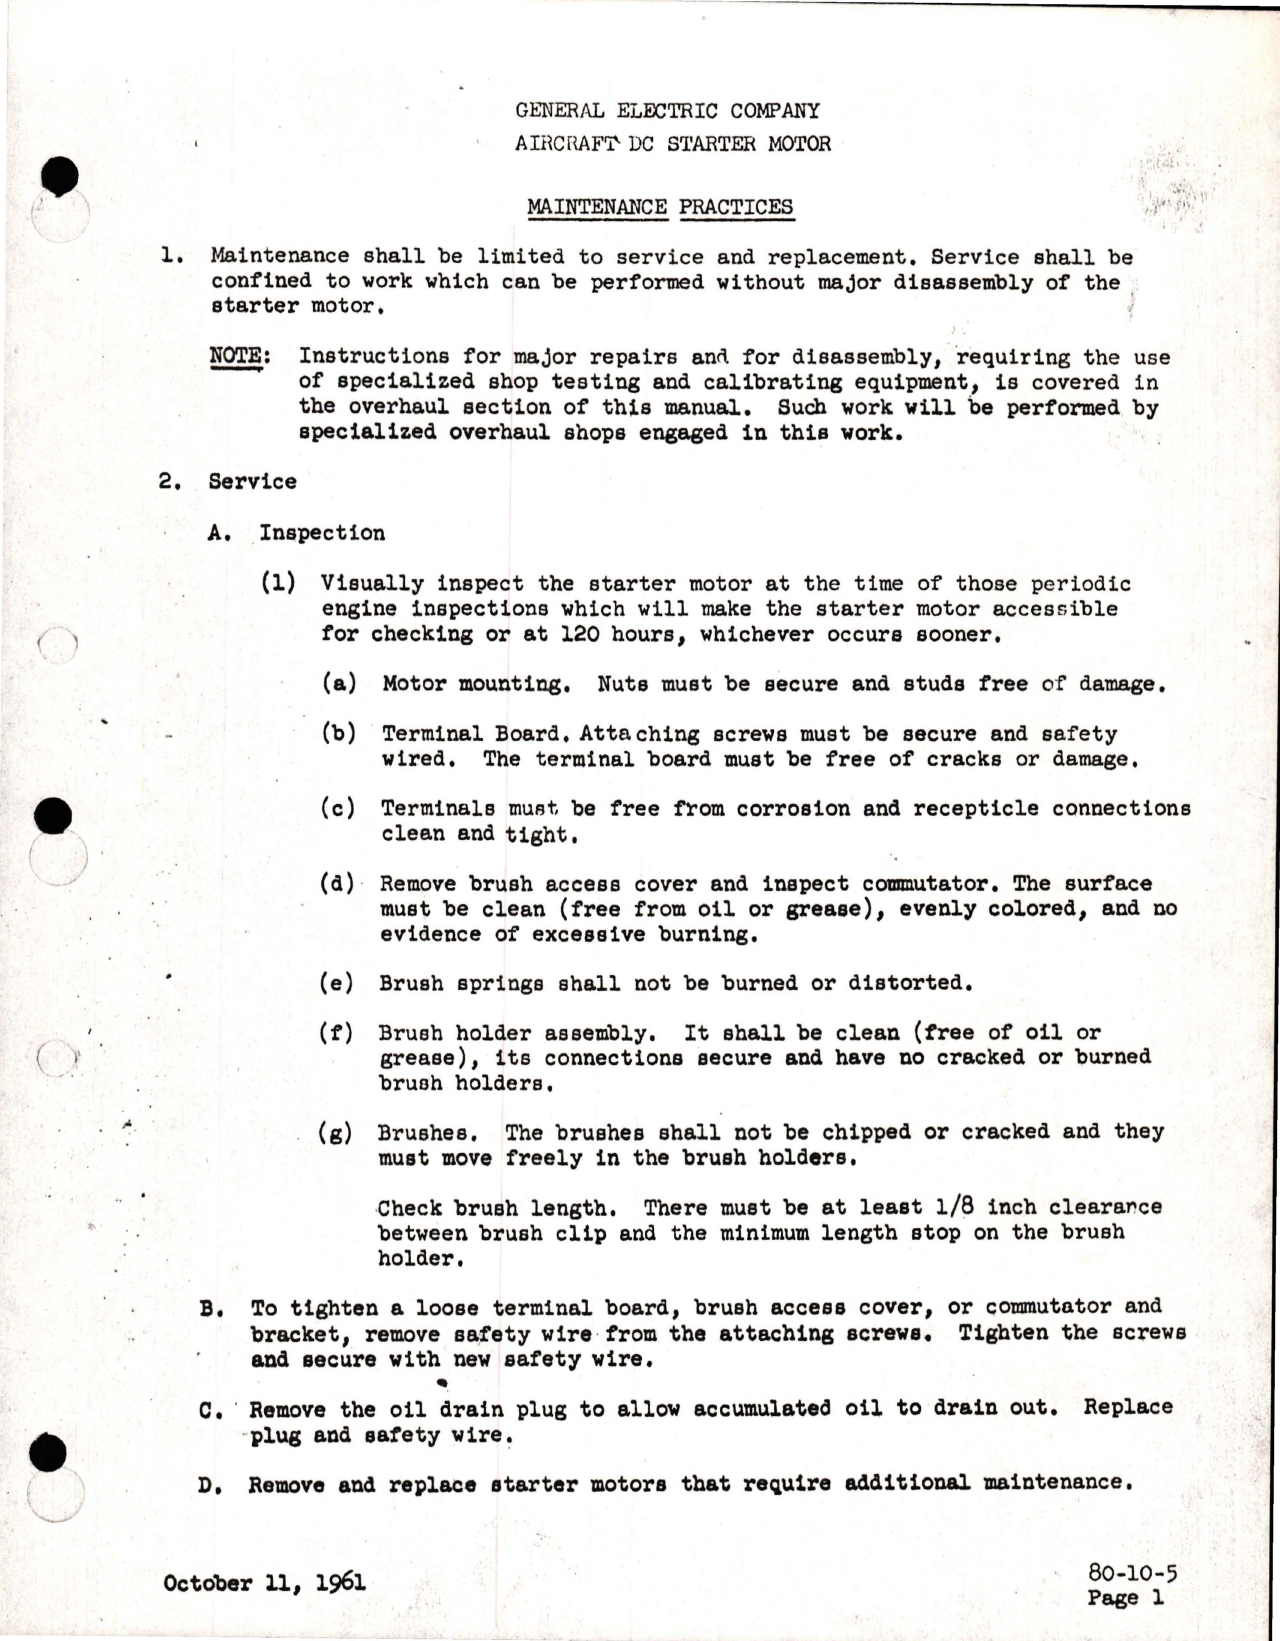 Sample page 9 from AirCorps Library document: Instructions for Aircraft DC Starter Motor - Model 2CM270D5 